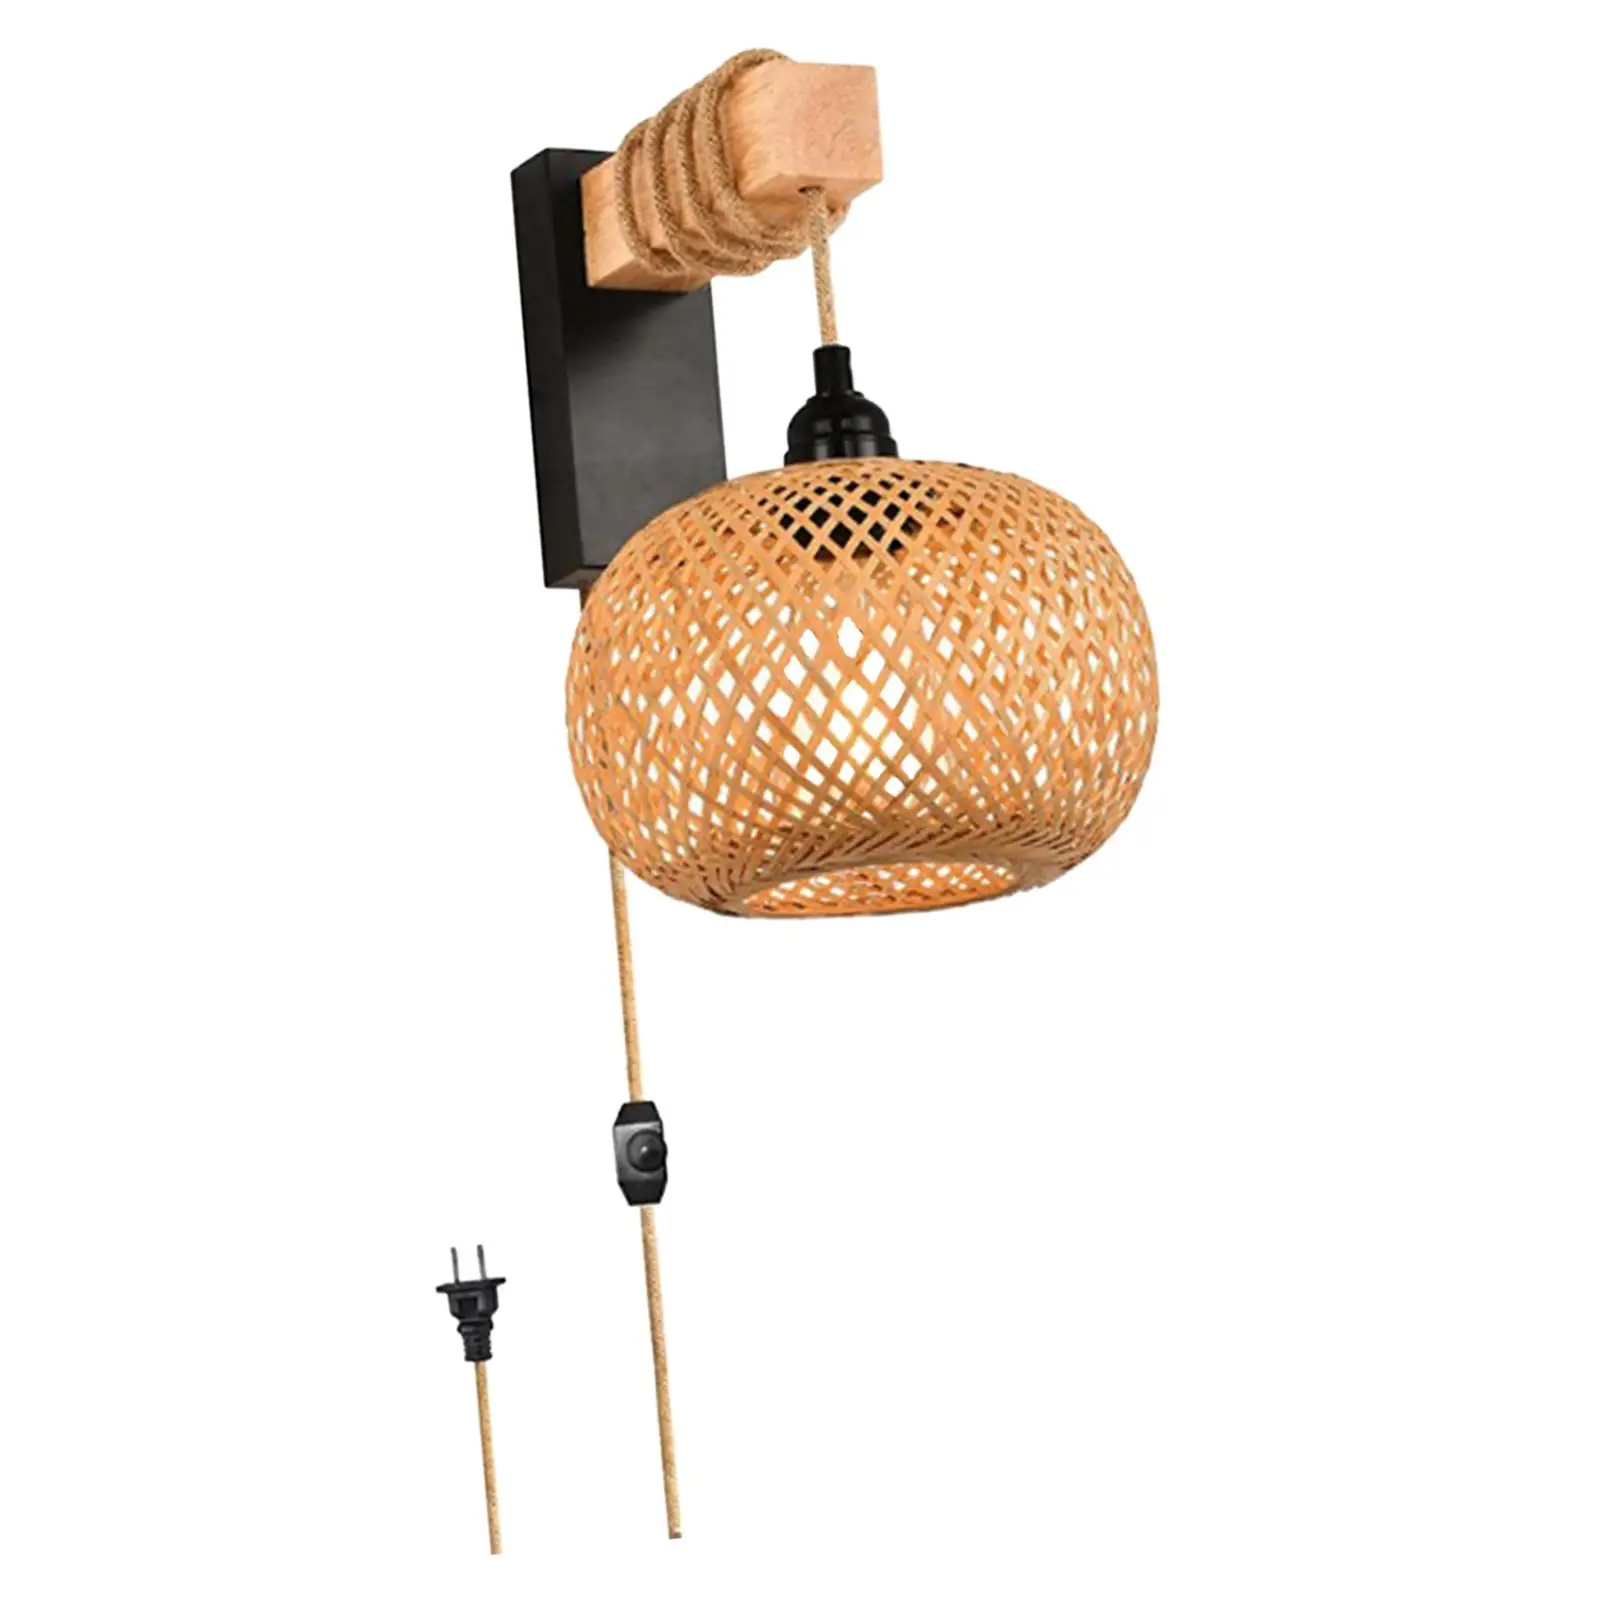 Rattan Wall Lamp Lantern Wall Light Plug in Wall Sconce Pendant Lights for Bedroom Living Room Dining Room Hallway Cafe Aisle